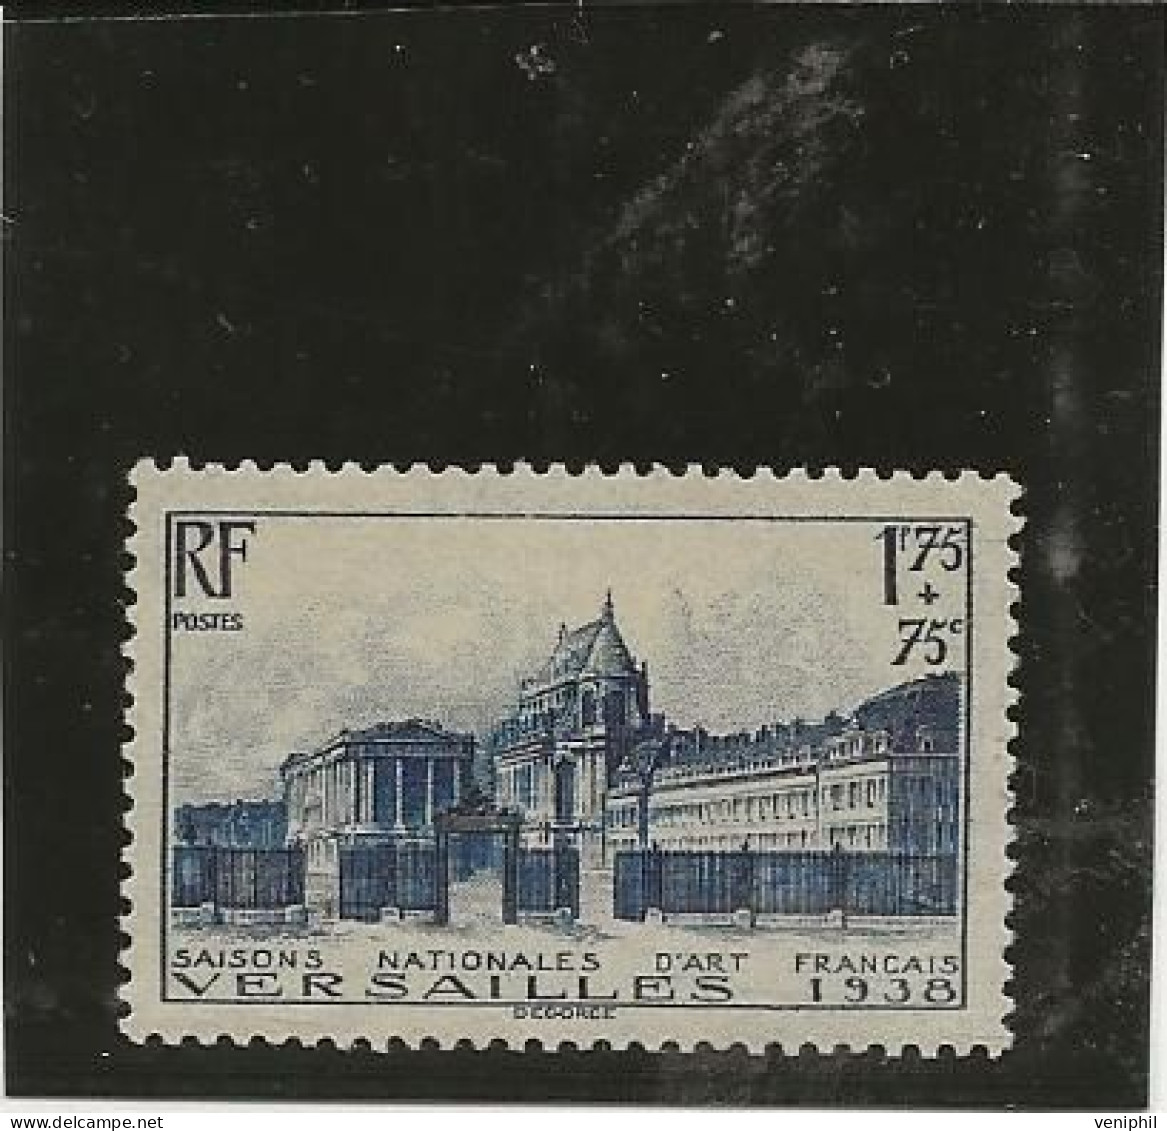 TIMBRE N° 379  NEUF AVEC GOMME ET SANS CHARNIERE - ANNEE 1938 - COTE : 46 € - Unused Stamps